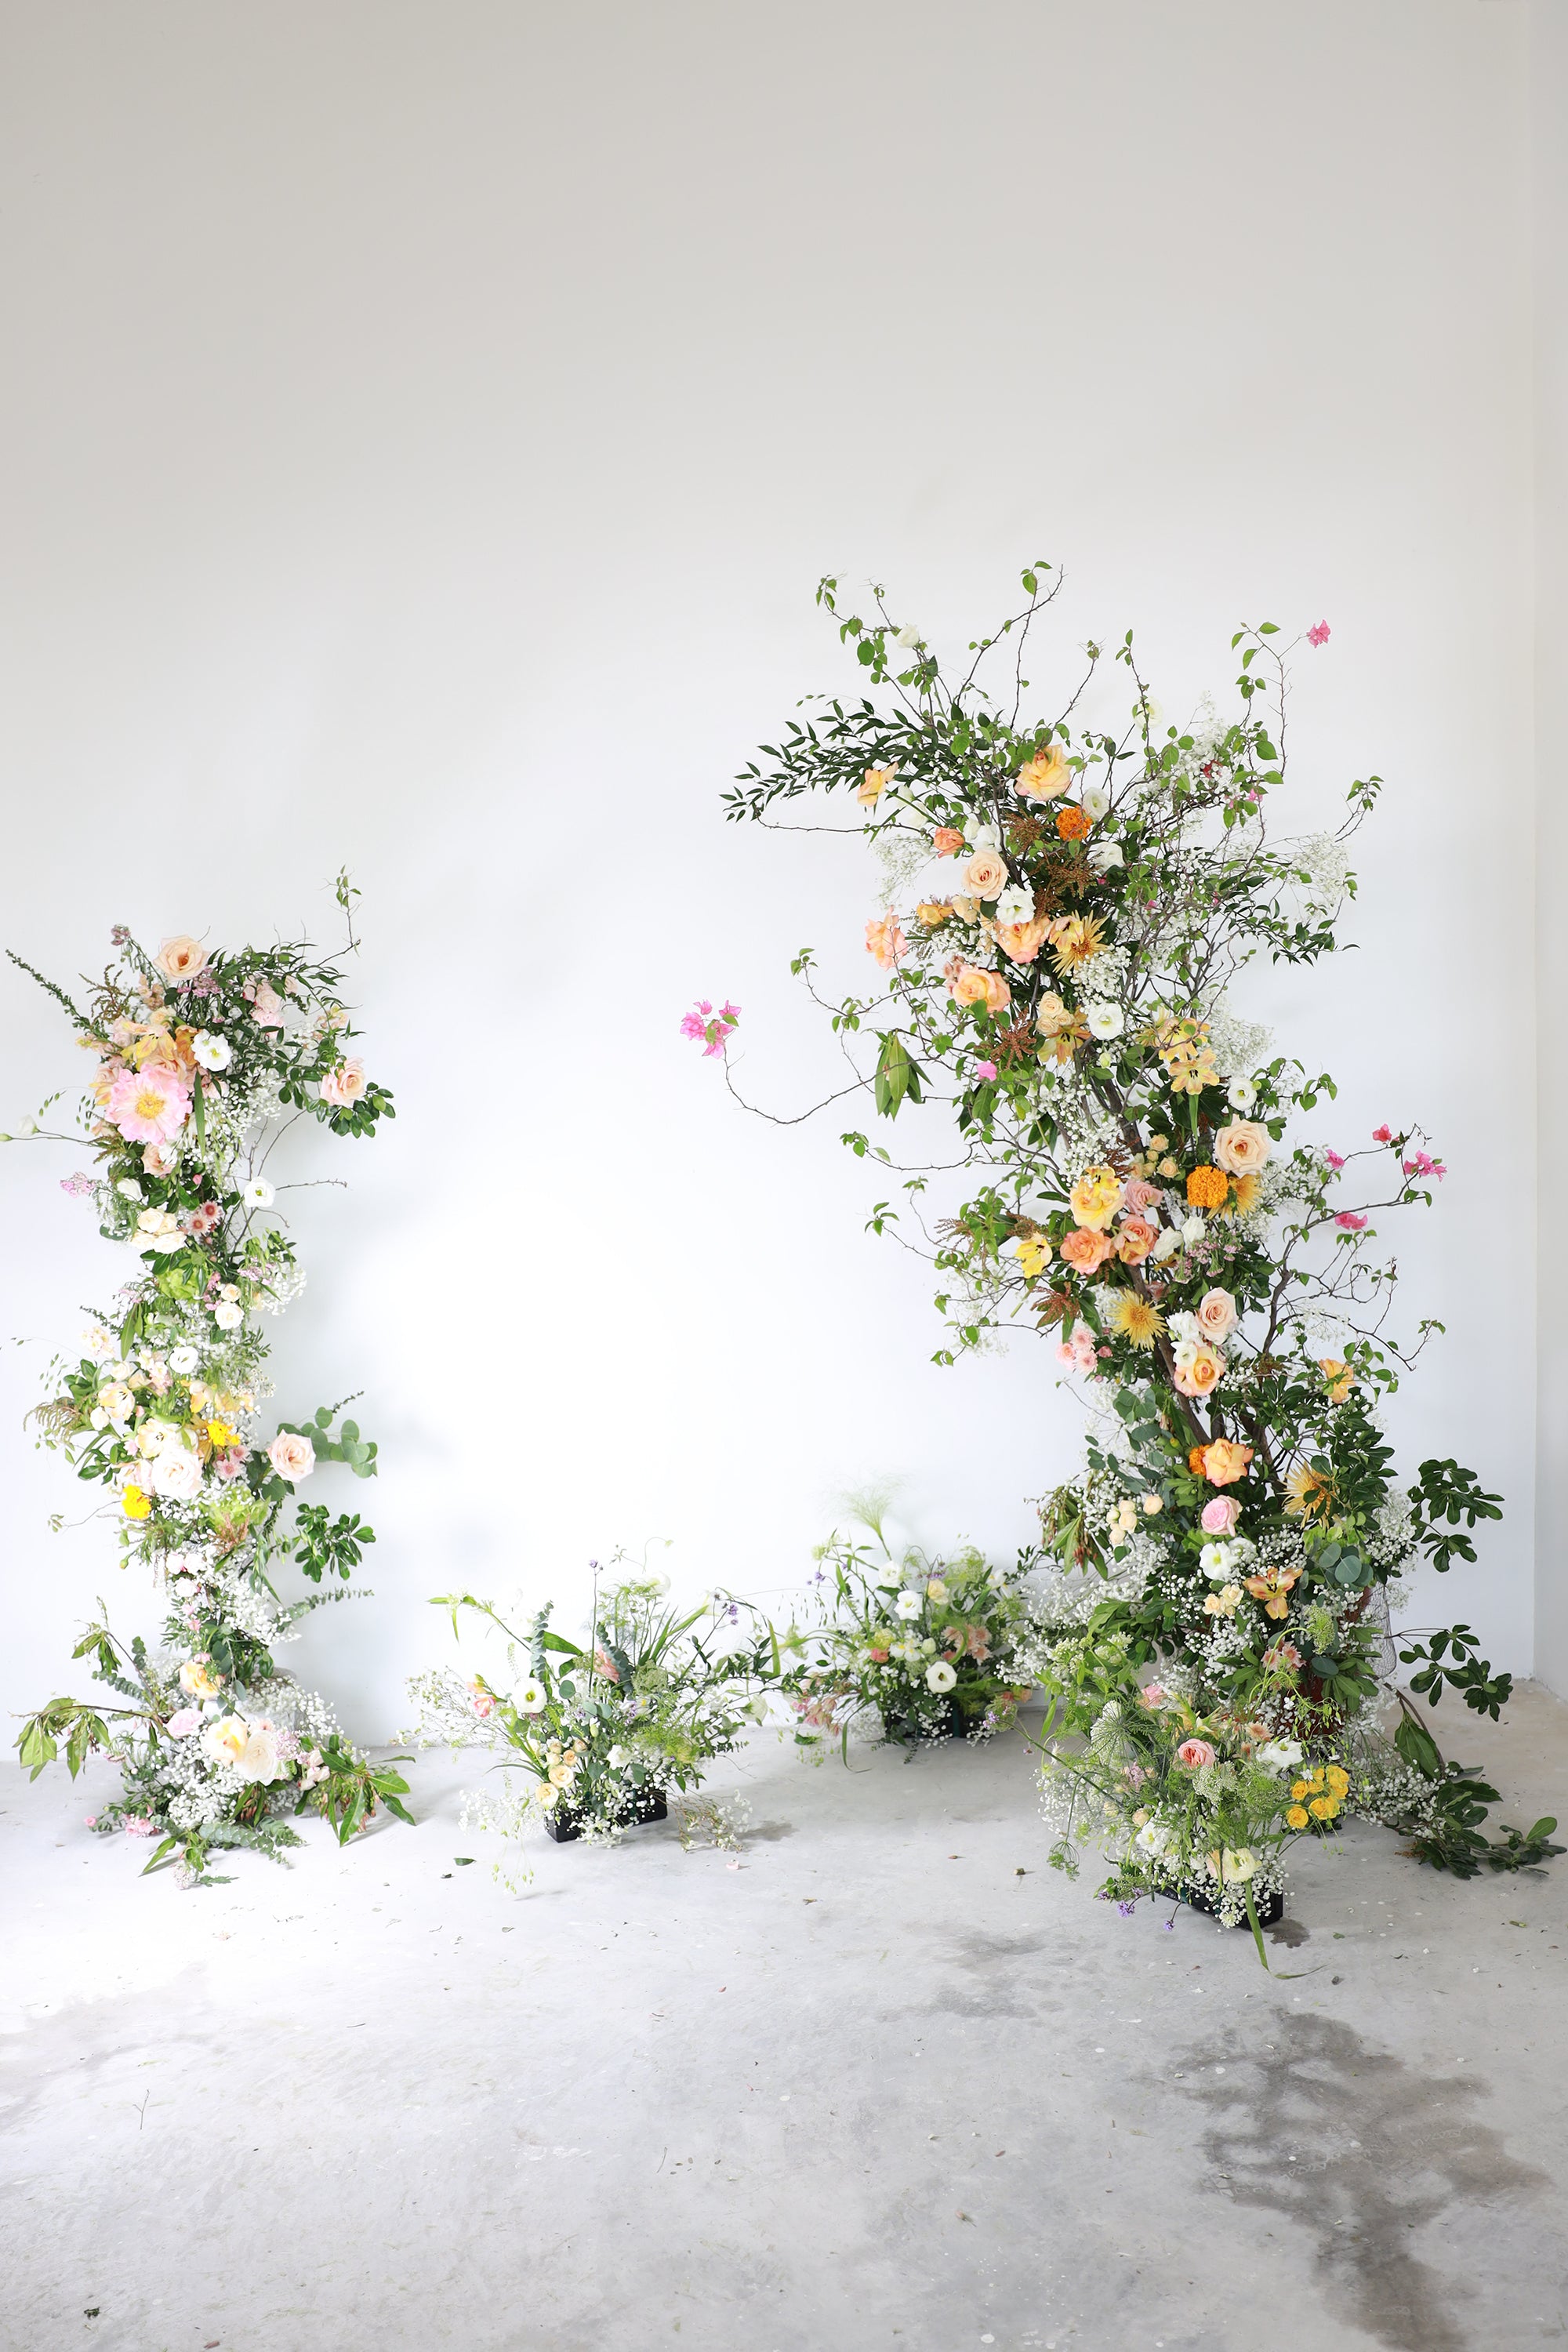 Celebrating the natural beauty of flowers with Charlotte Puxley